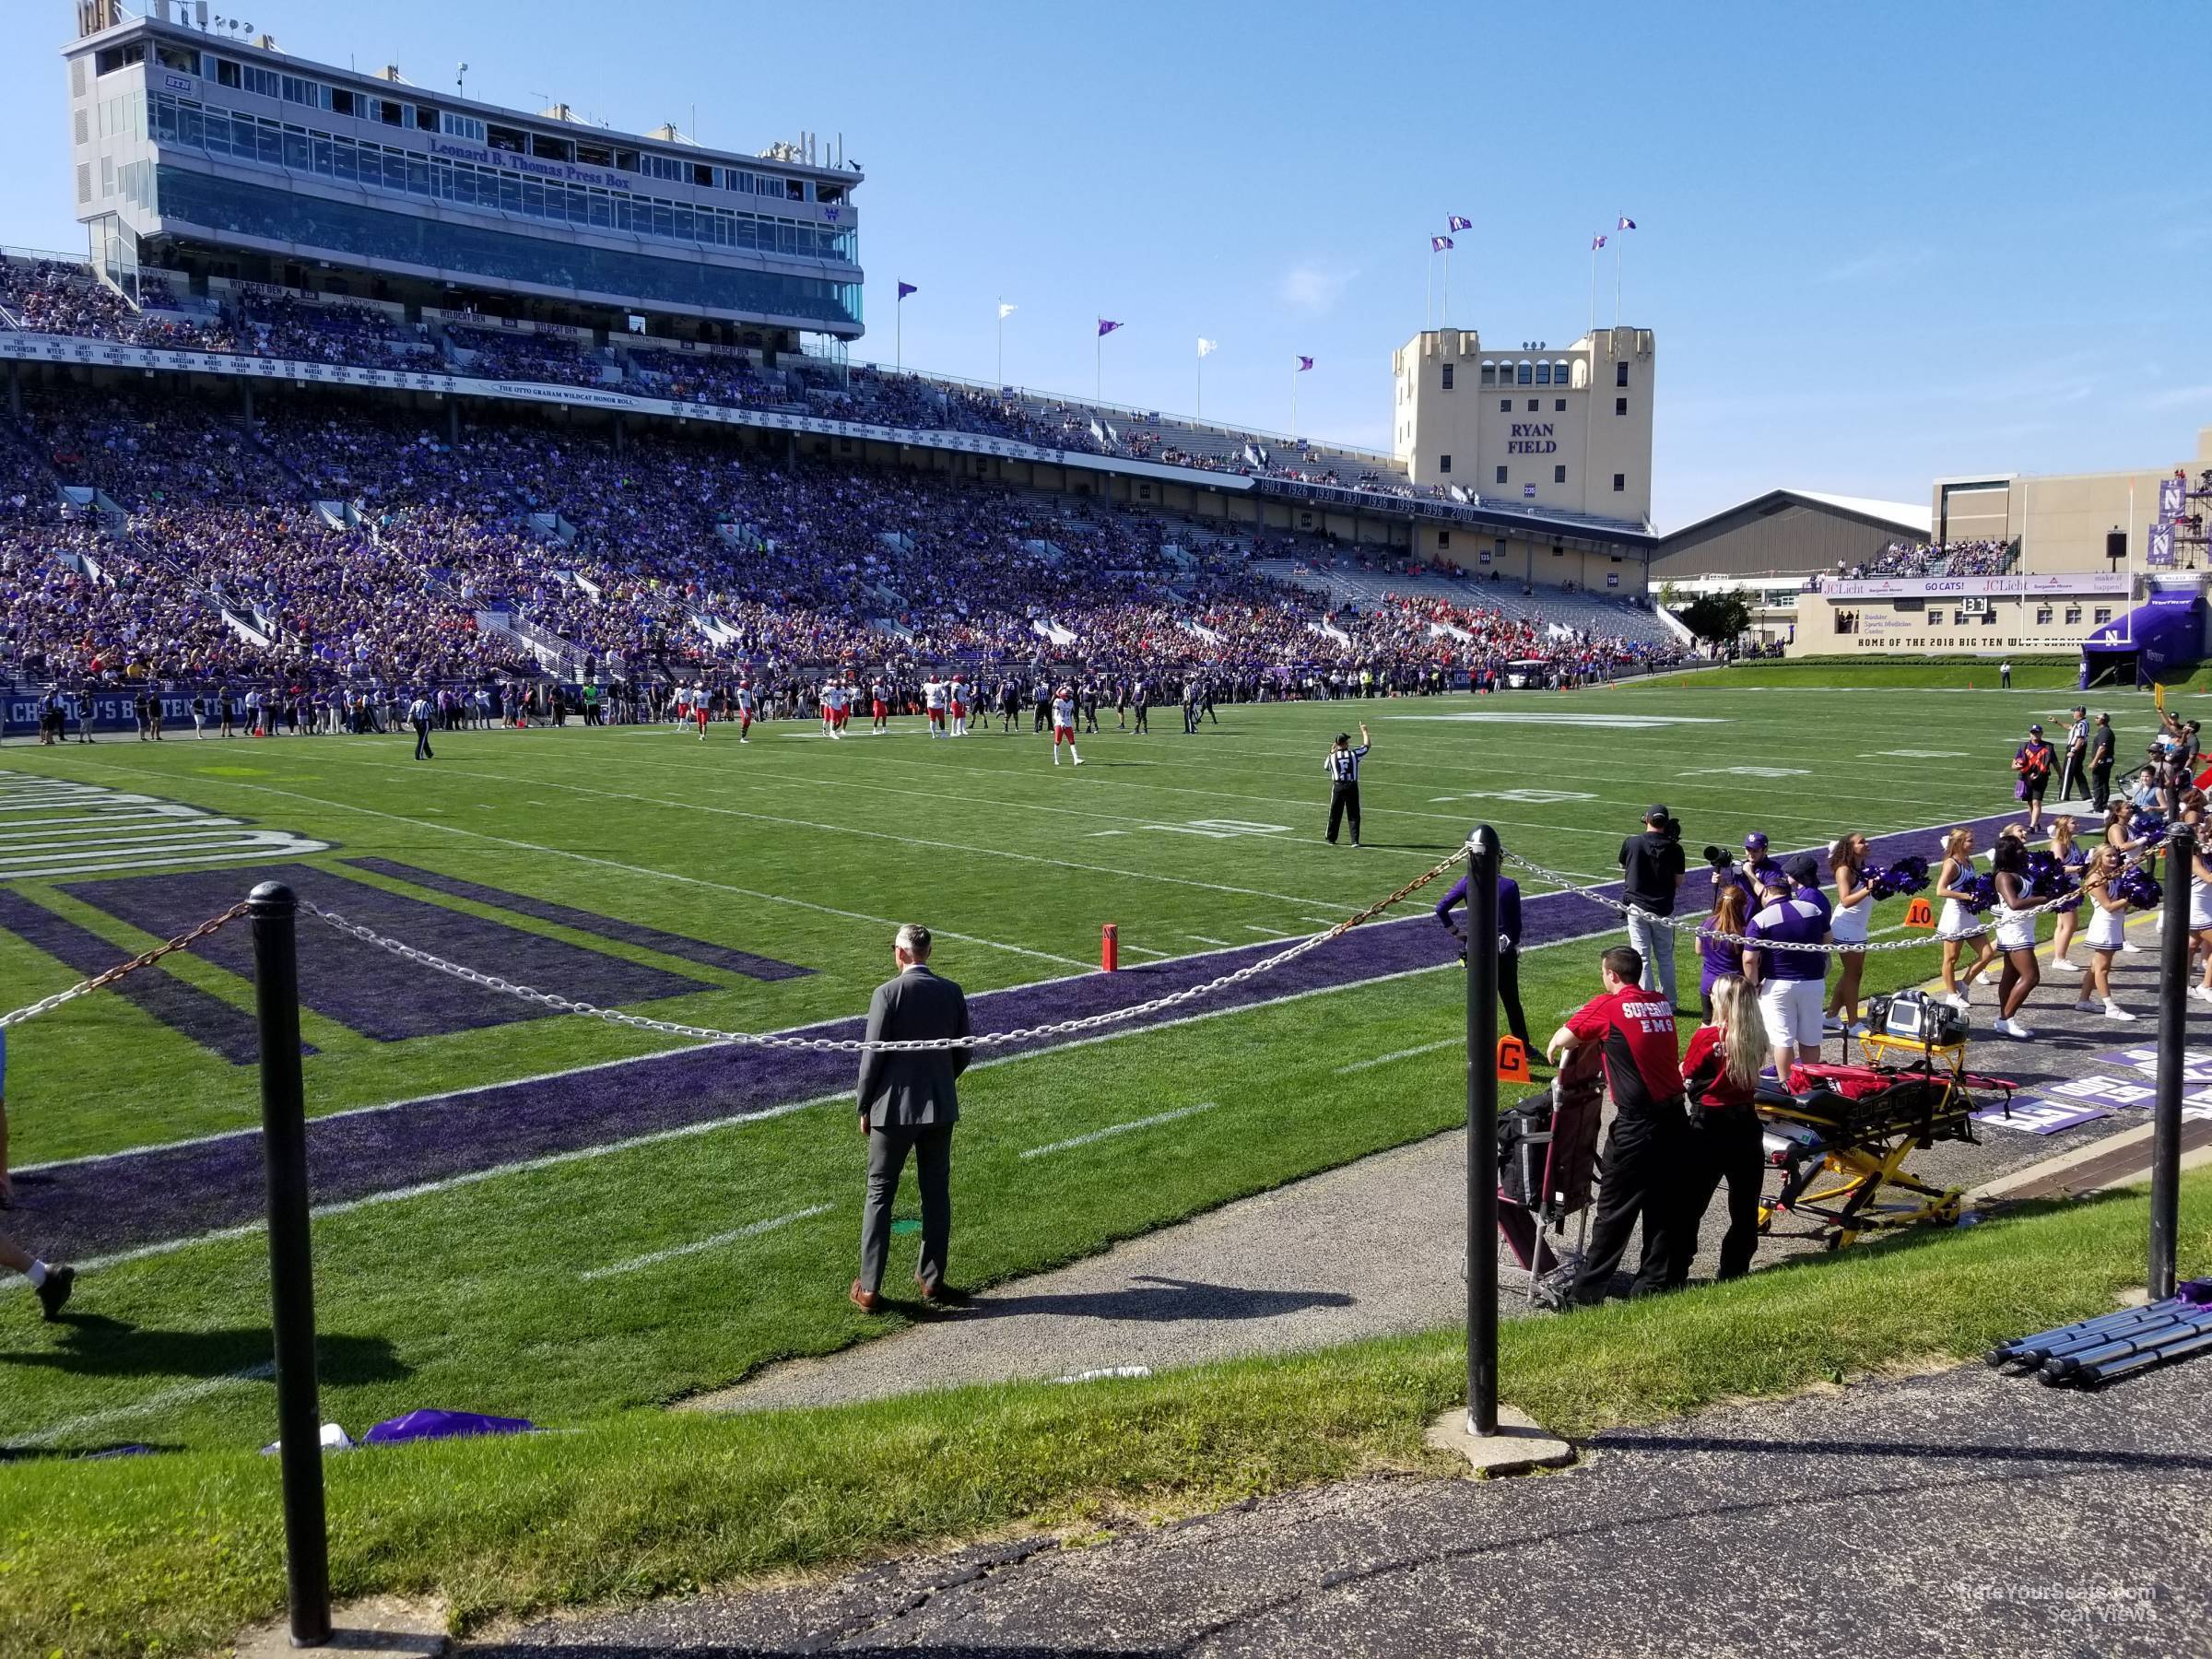 section 113, row 1 seat view  - ryan field